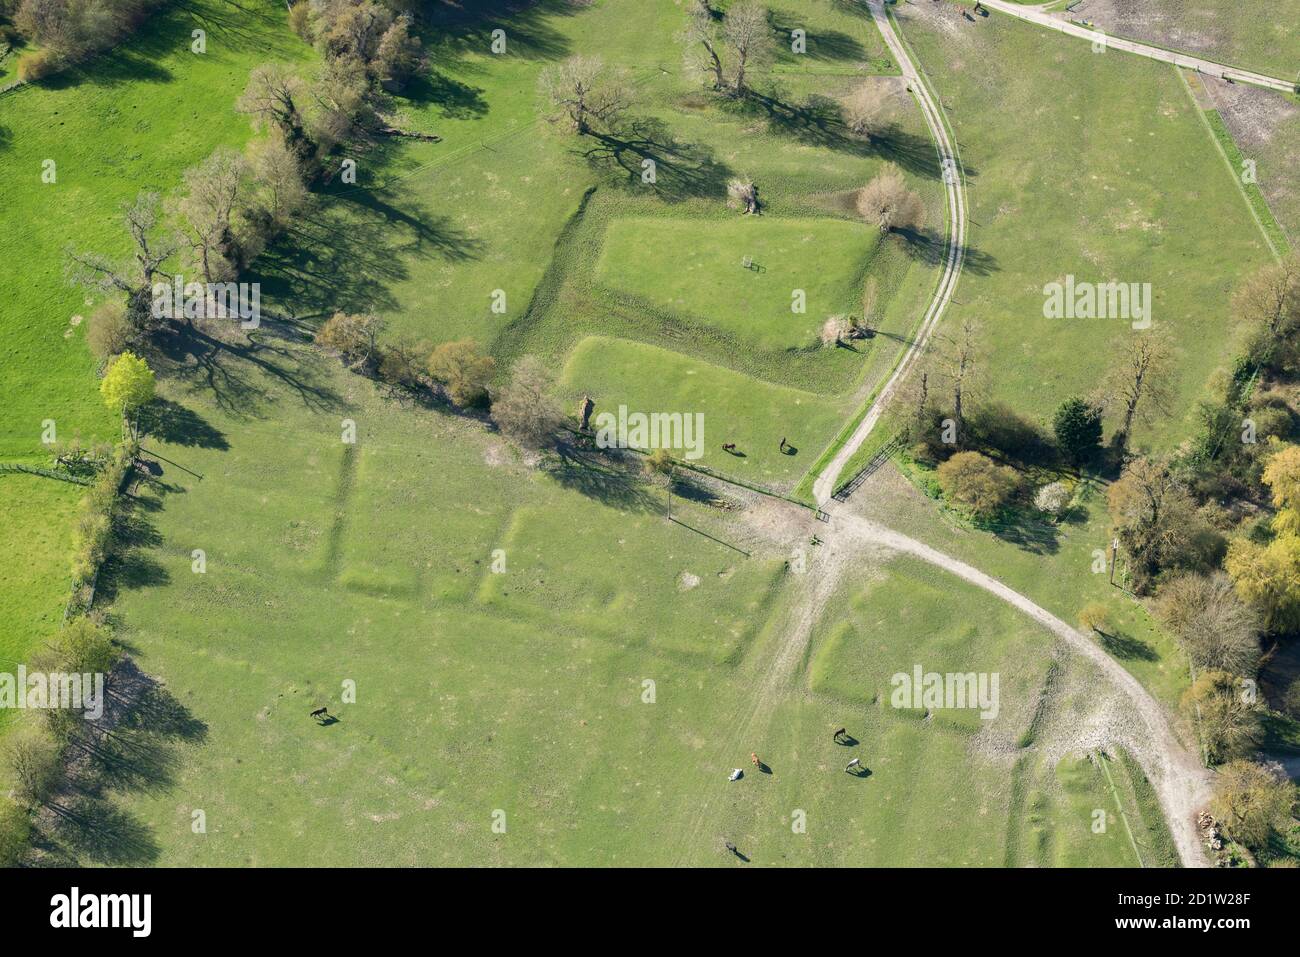 Medieval moat and settlement earthworks at Manor Farm, Great Kimble, Buckinghamshire, UK. Aerial view. Stock Photo